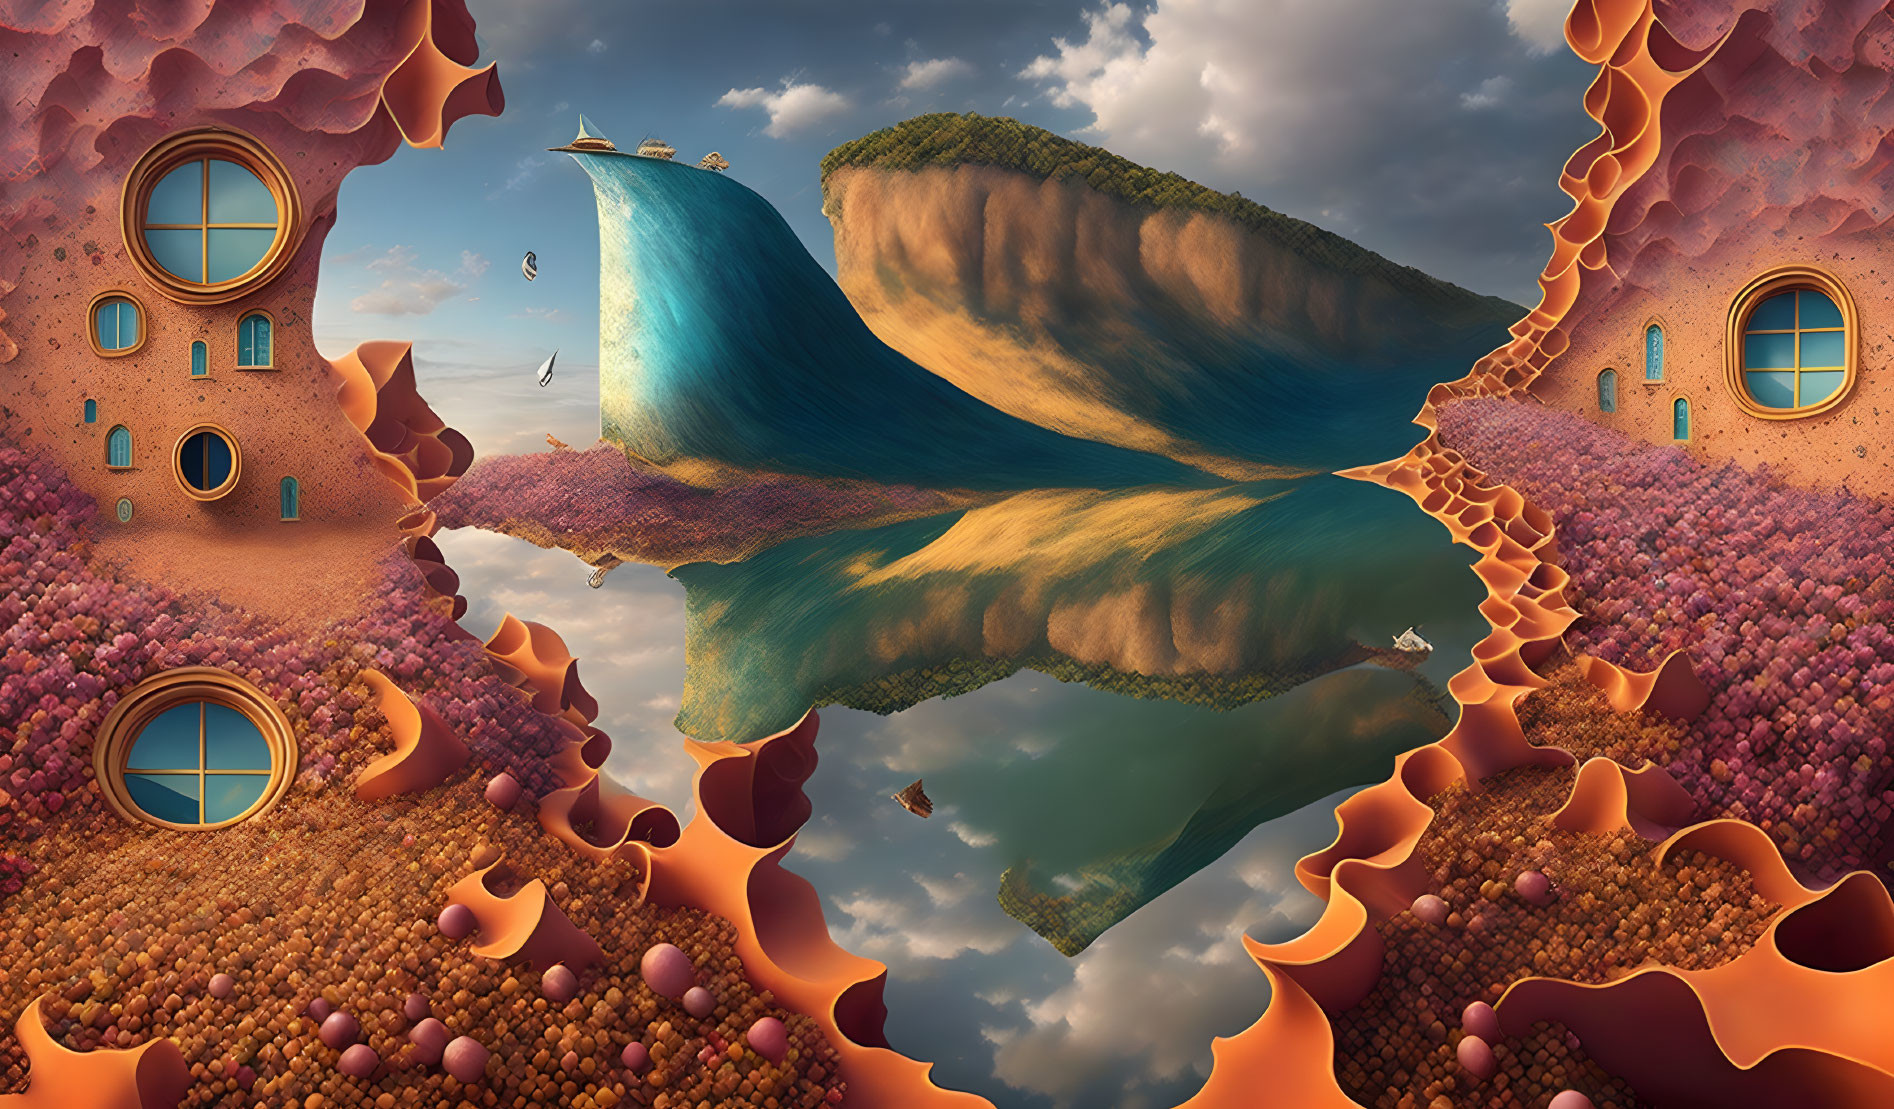 Surreal landscape with floating island and wave-shaped cliffs